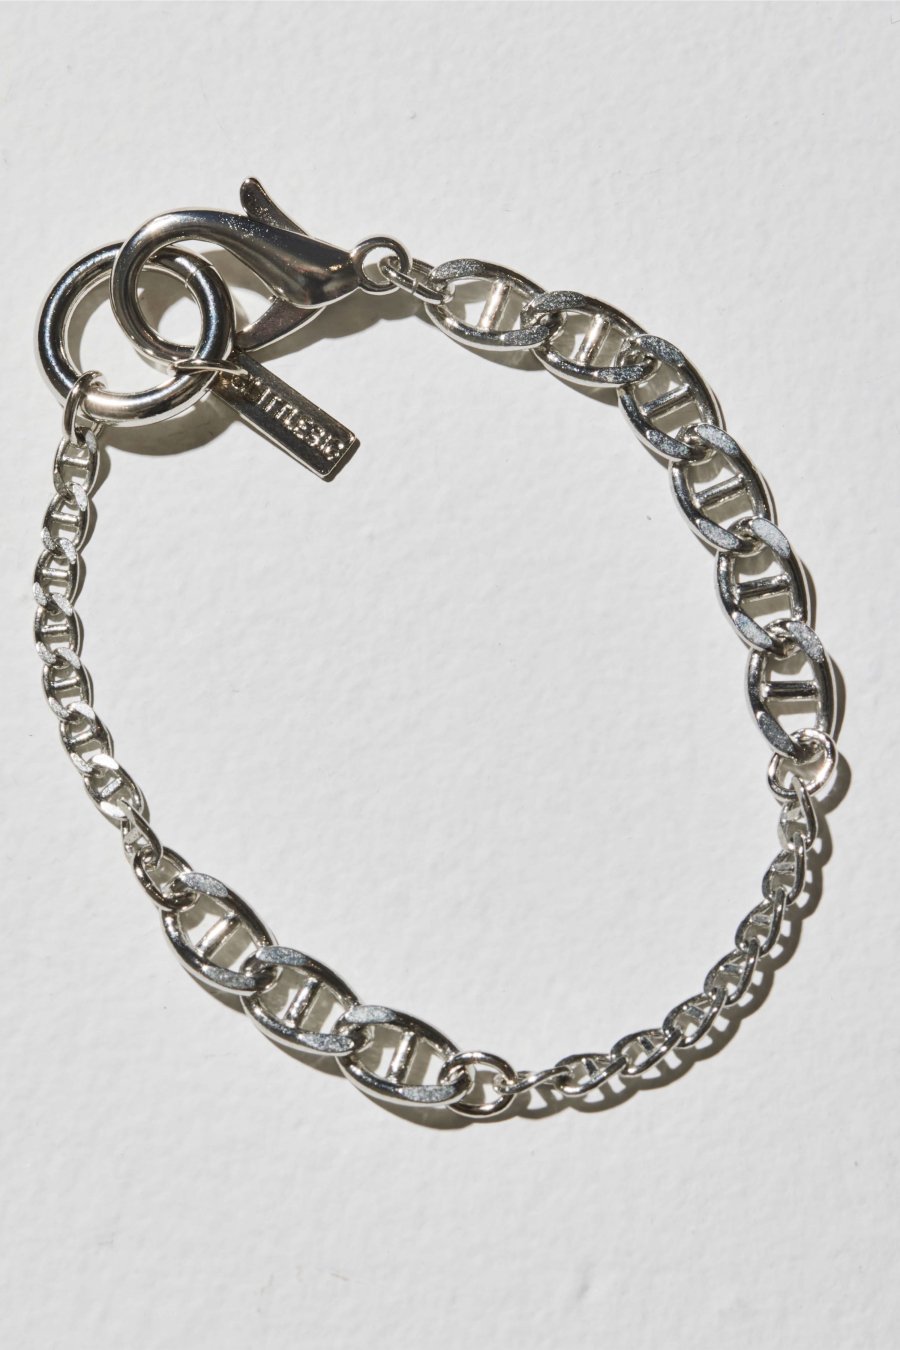 LITTLEBIG  23ss Chain Bracelet
<img class='new_mark_img2' src='https://img.shop-pro.jp/img/new/icons15.gif' style='border:none;display:inline;margin:0px;padding:0px;width:auto;' />